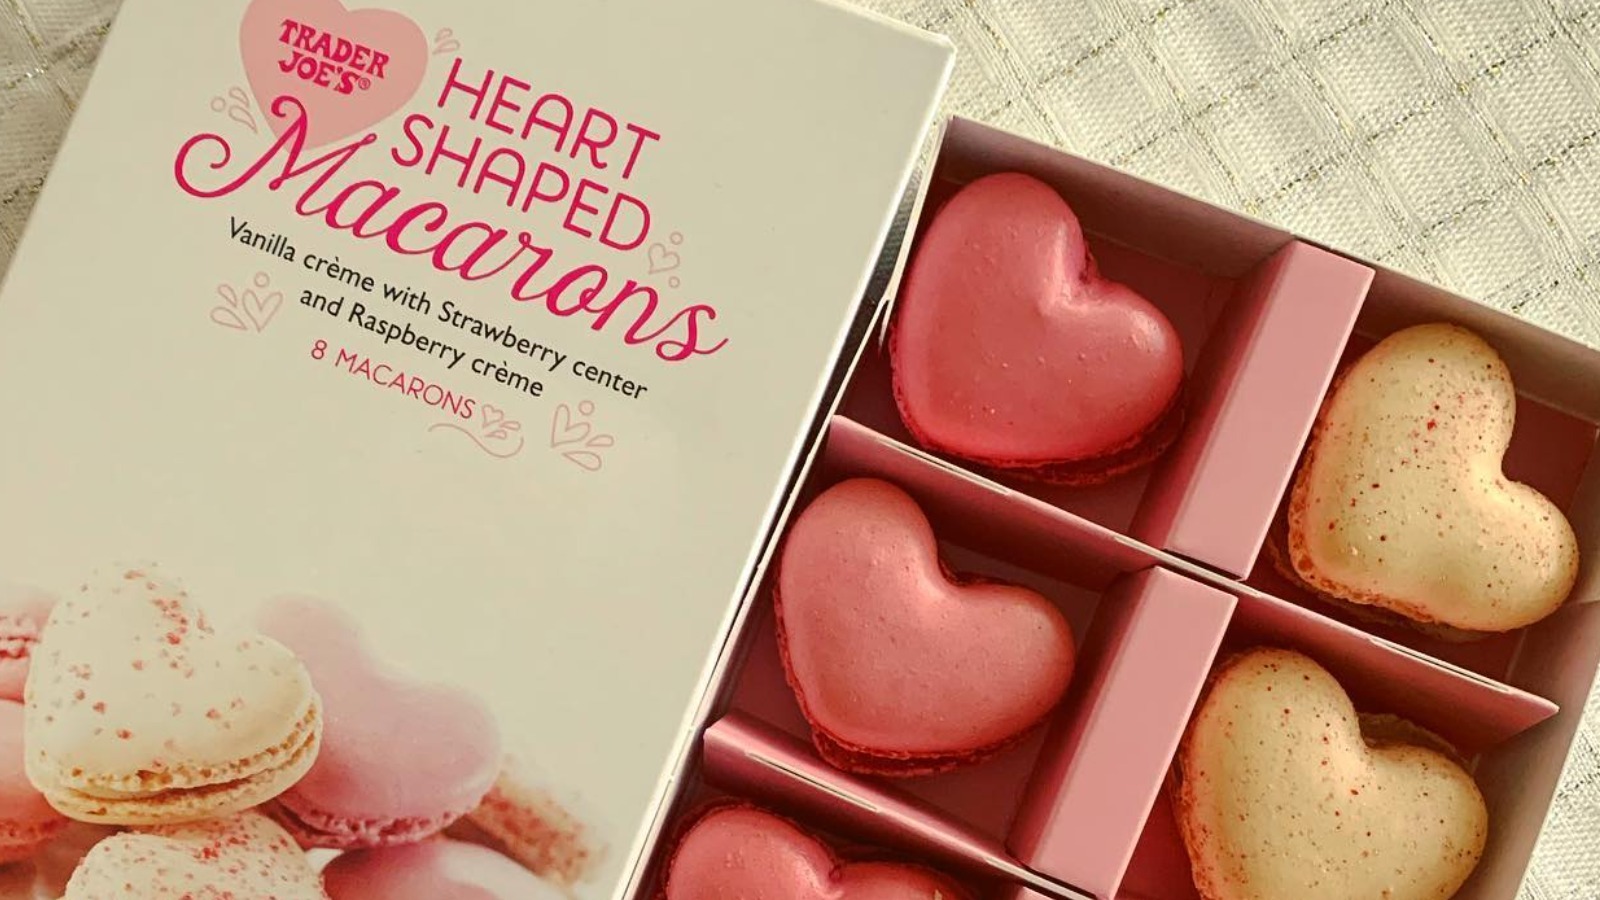 Trader Joe's HeartShaped Macarons Are Back In Time For Valentine's Day